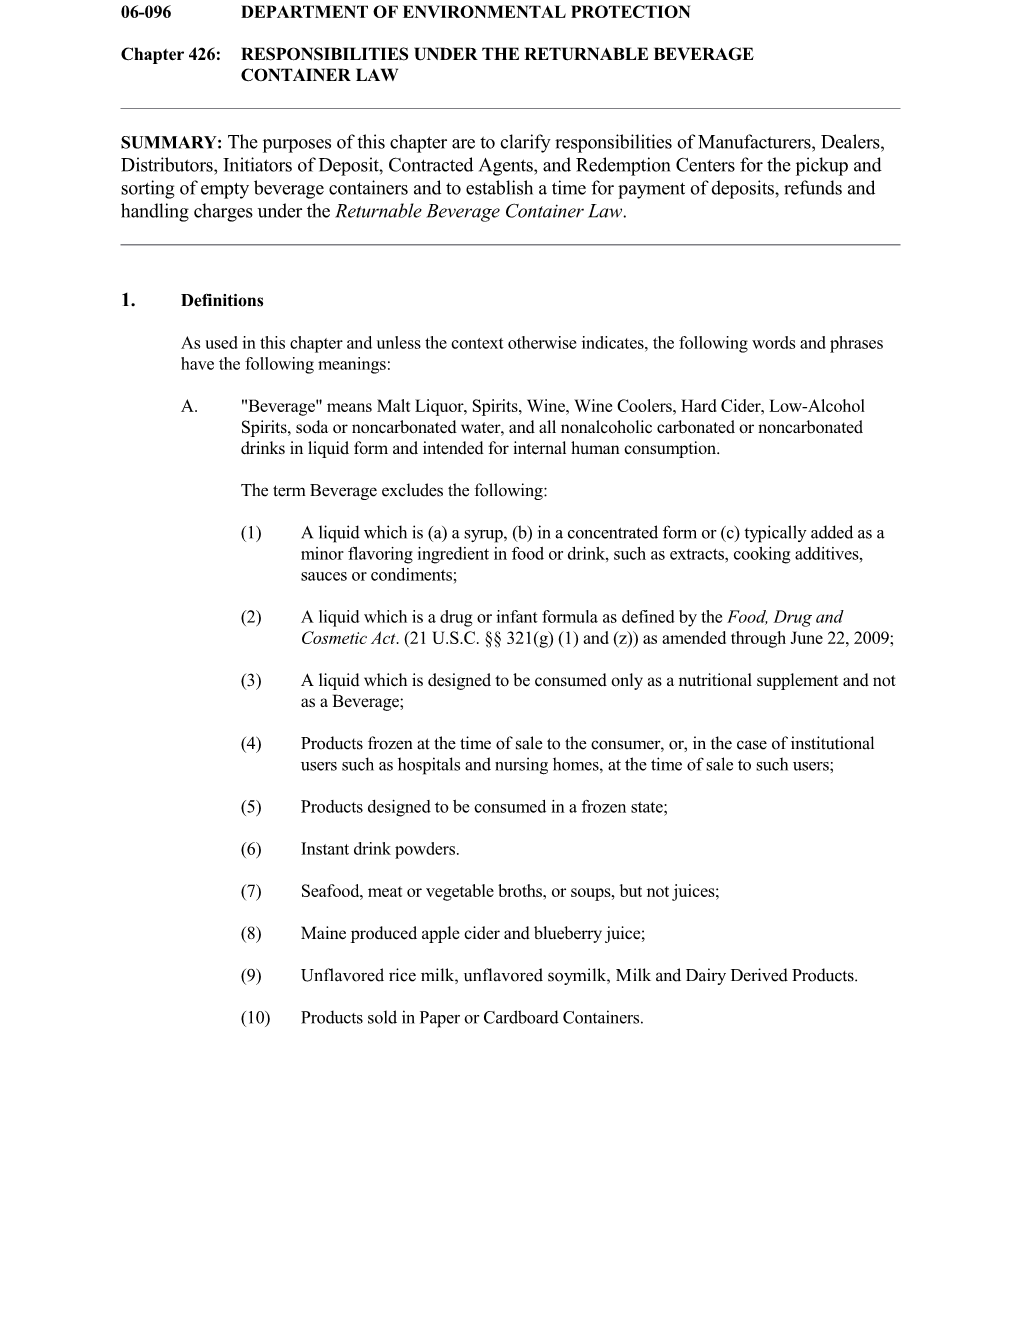 06-096 CMR Ch. 426: Responsibilities Under the Returnable Beverage Container Law Page 1